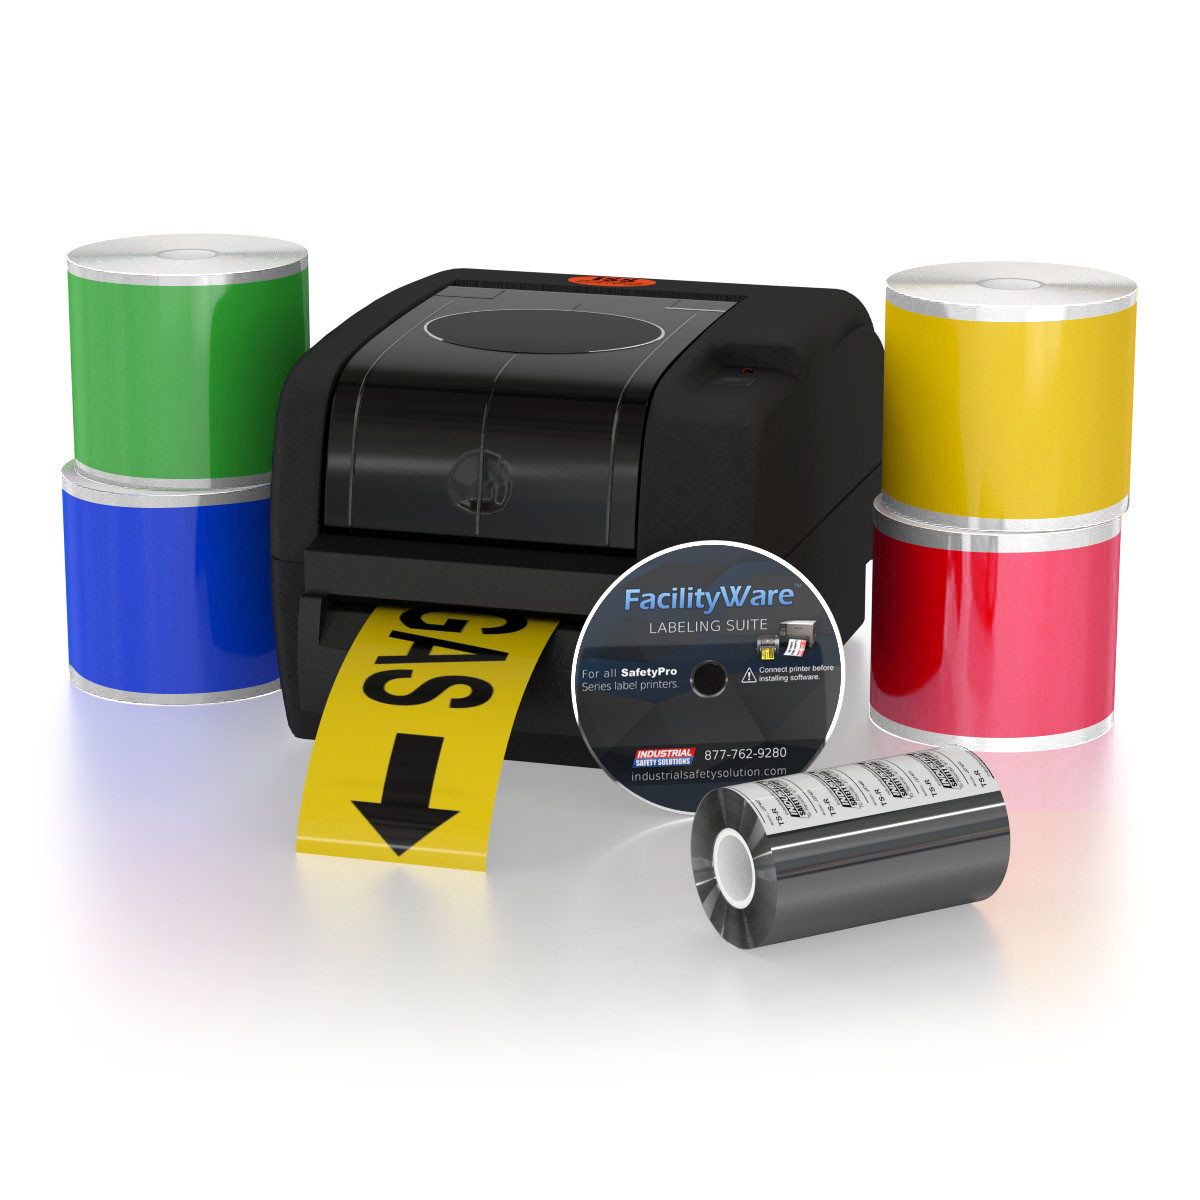 Detail view for SafetyPro Industrial Label Printer with Easy Application Supplies